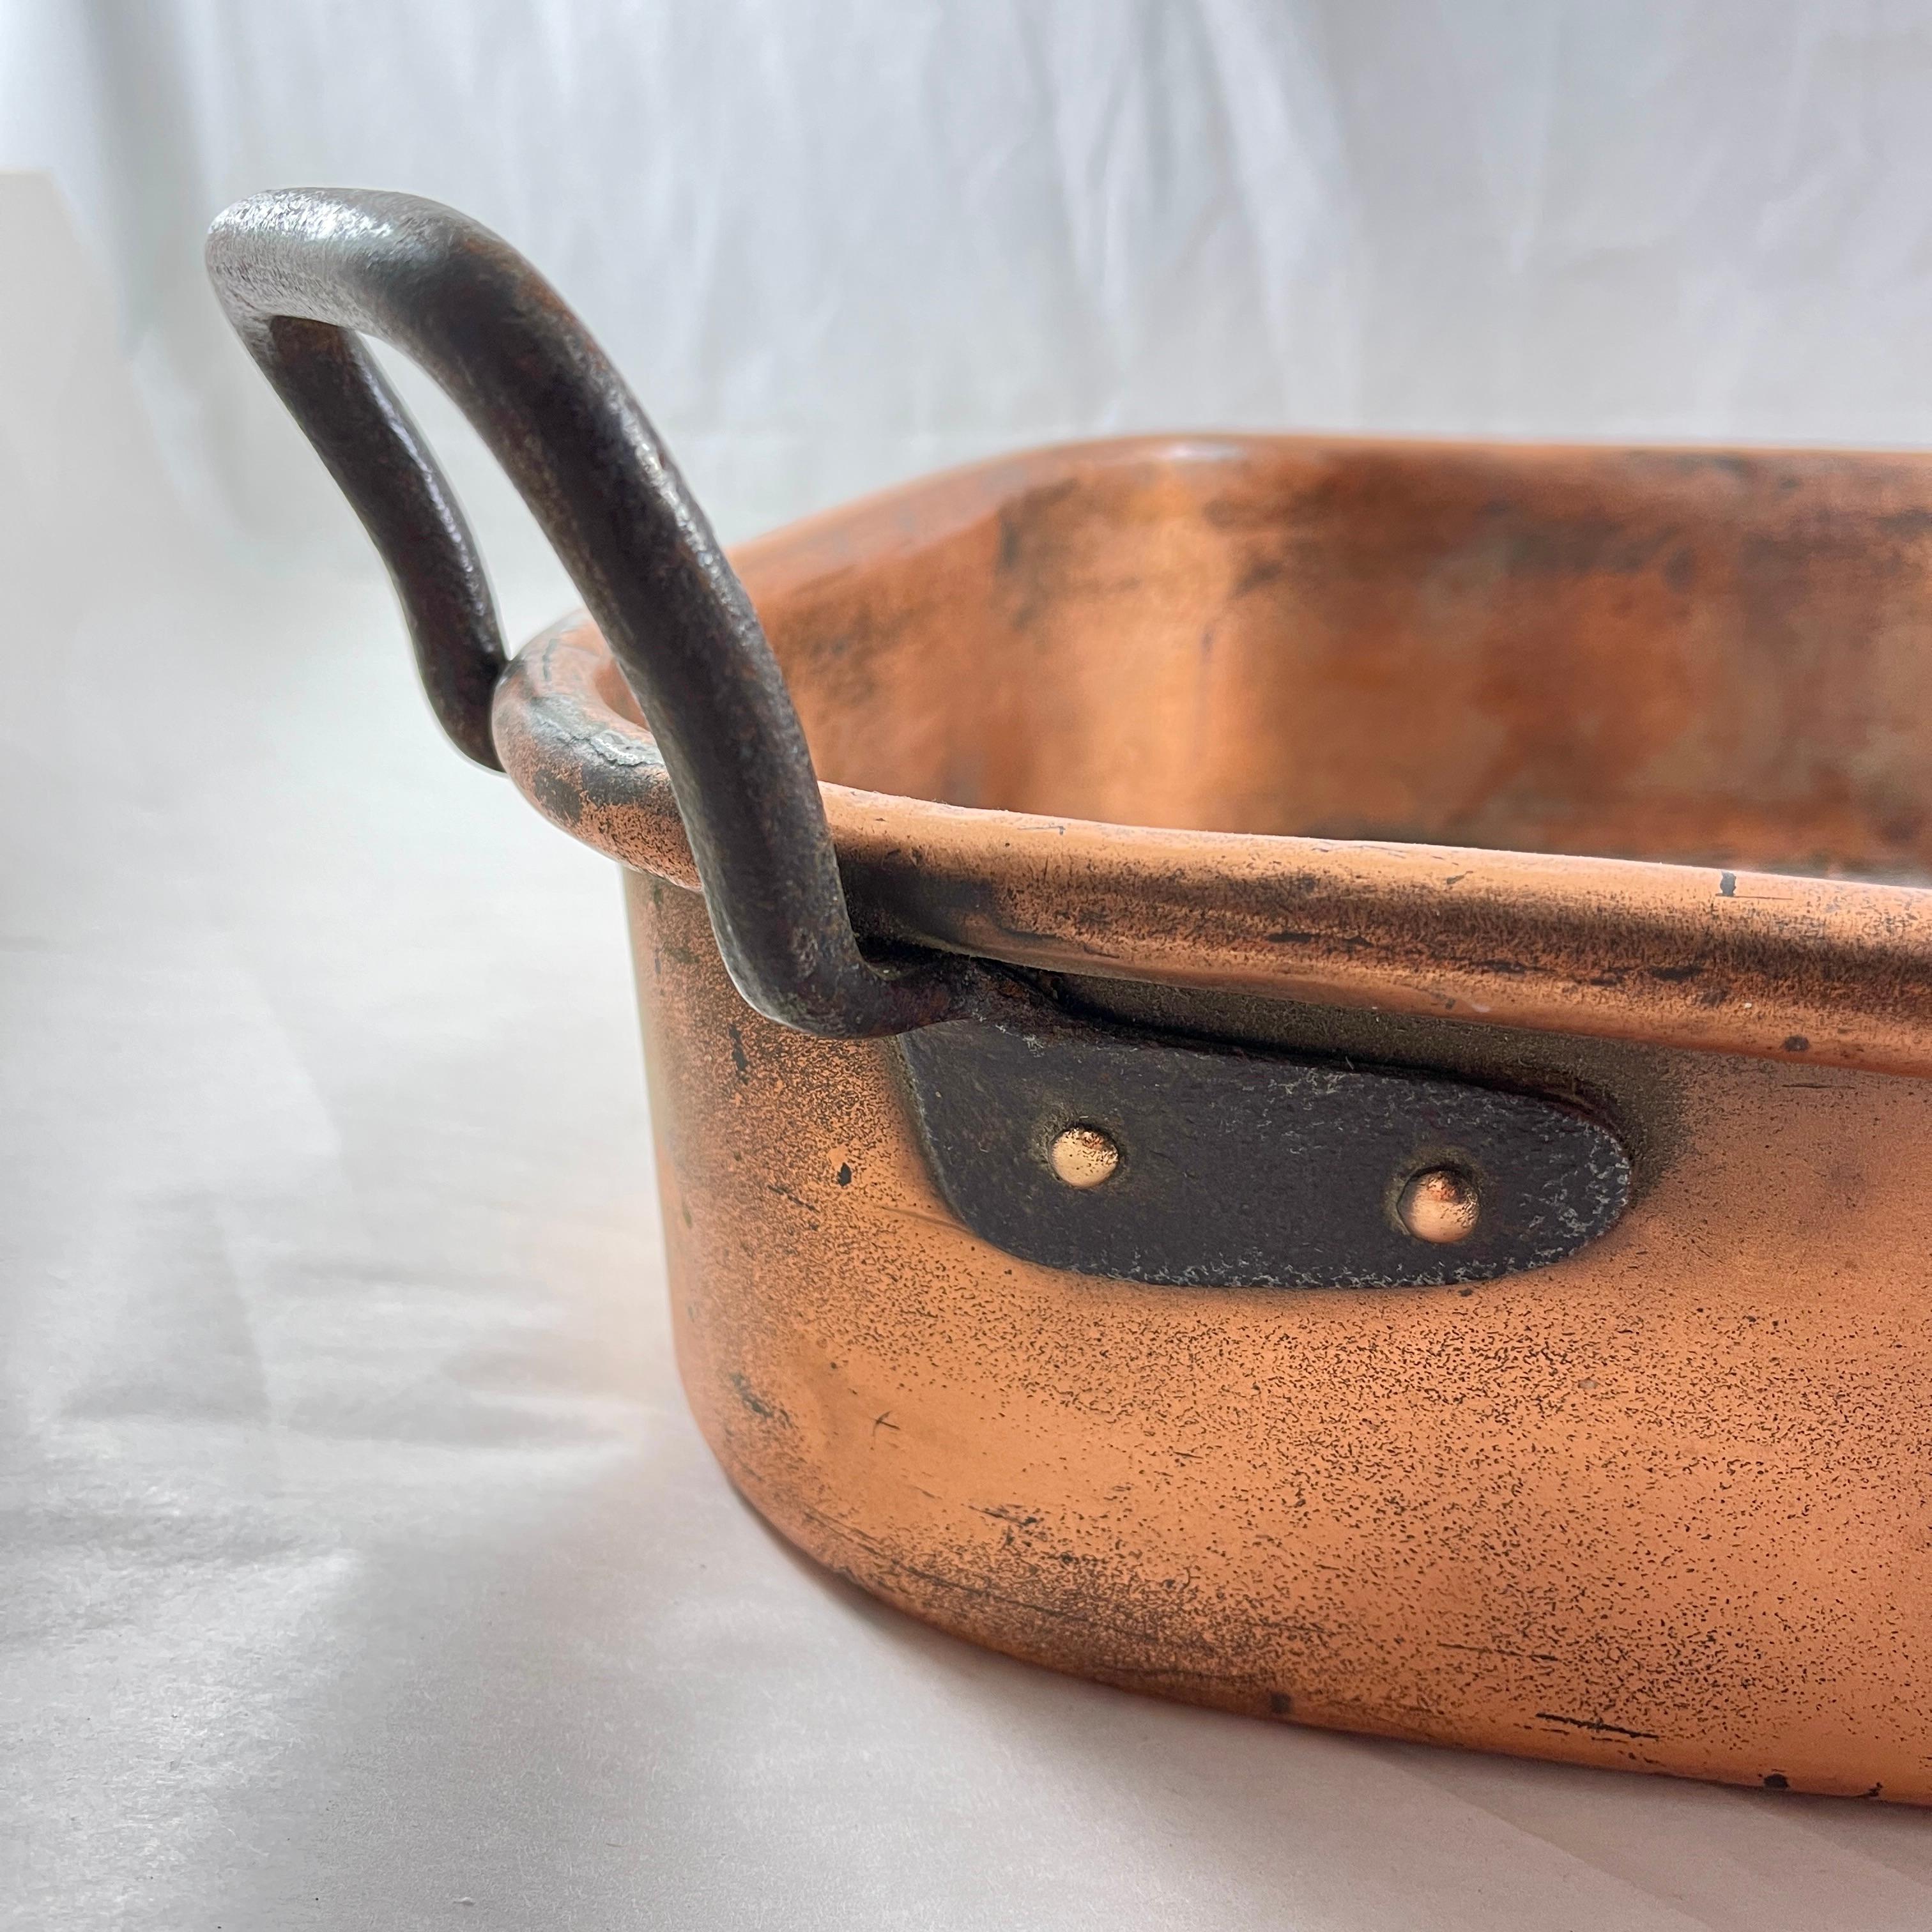 Rustic Country French Copper & Iron Handled Turbotiere Fish Poacher, c. 1850 For Sale 2